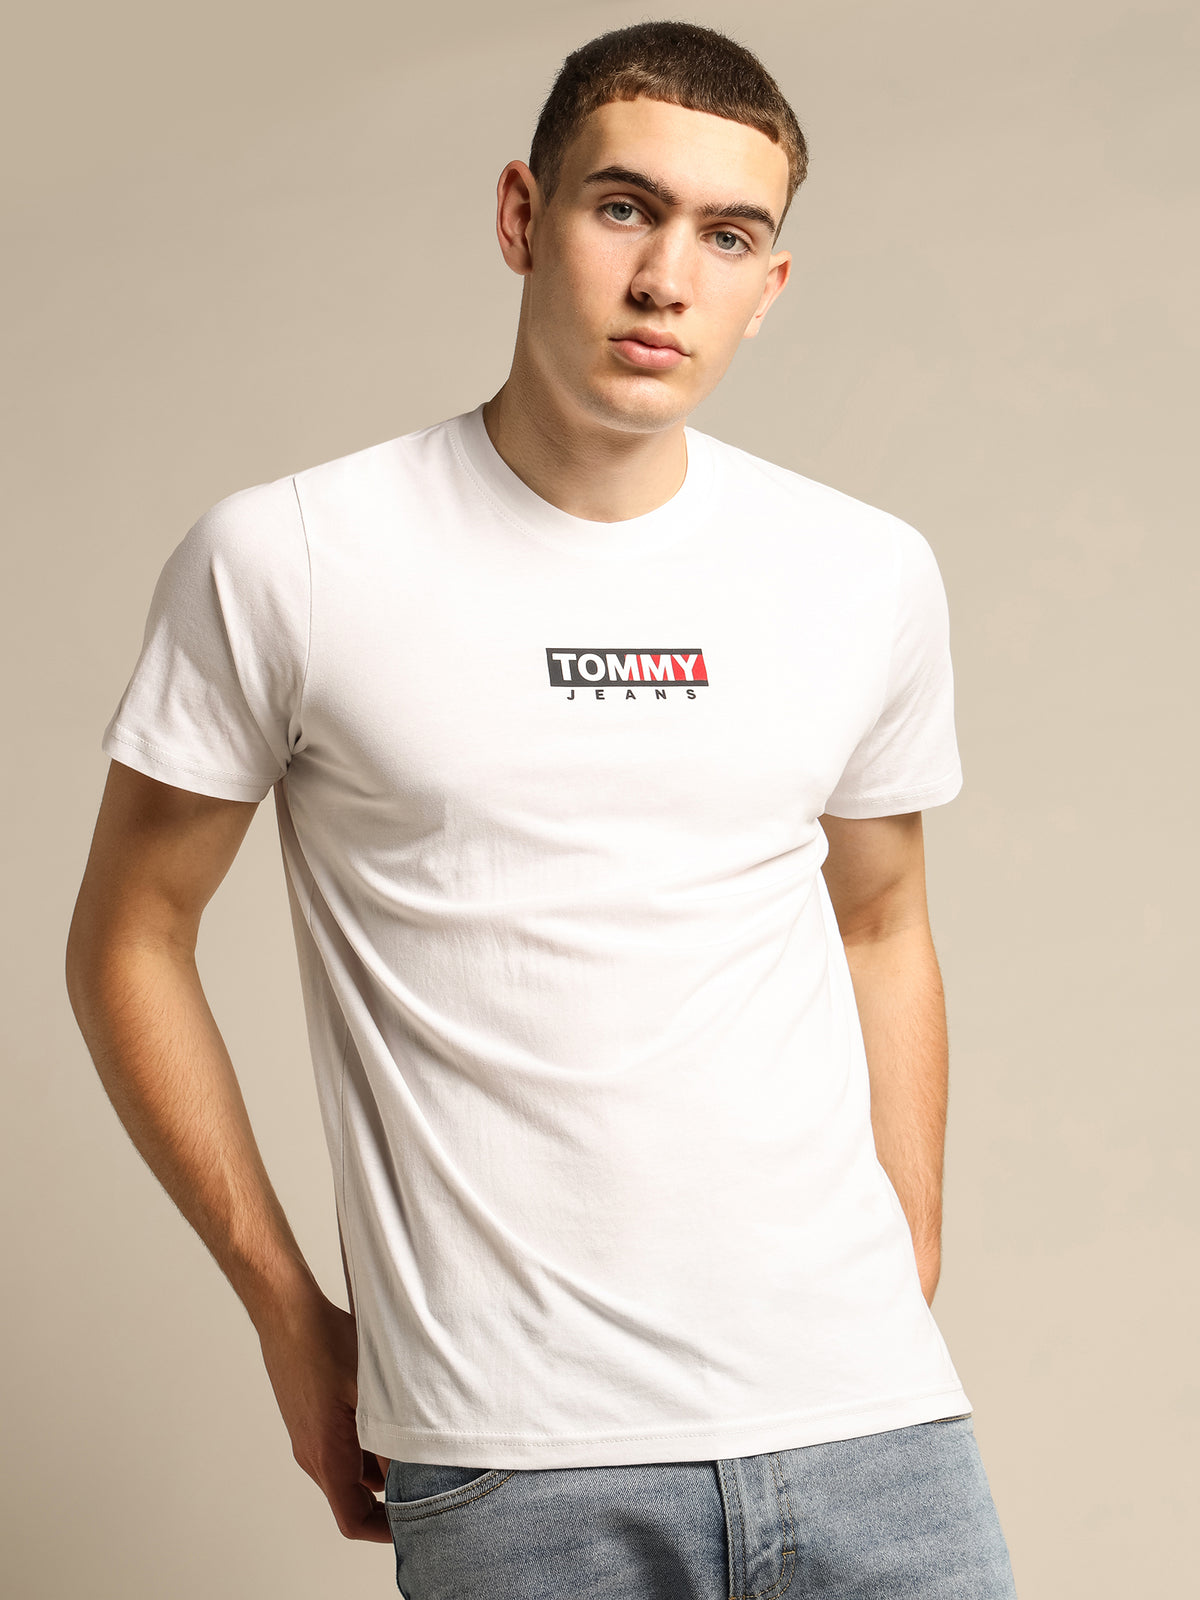 Entry Print T-Shirt in White